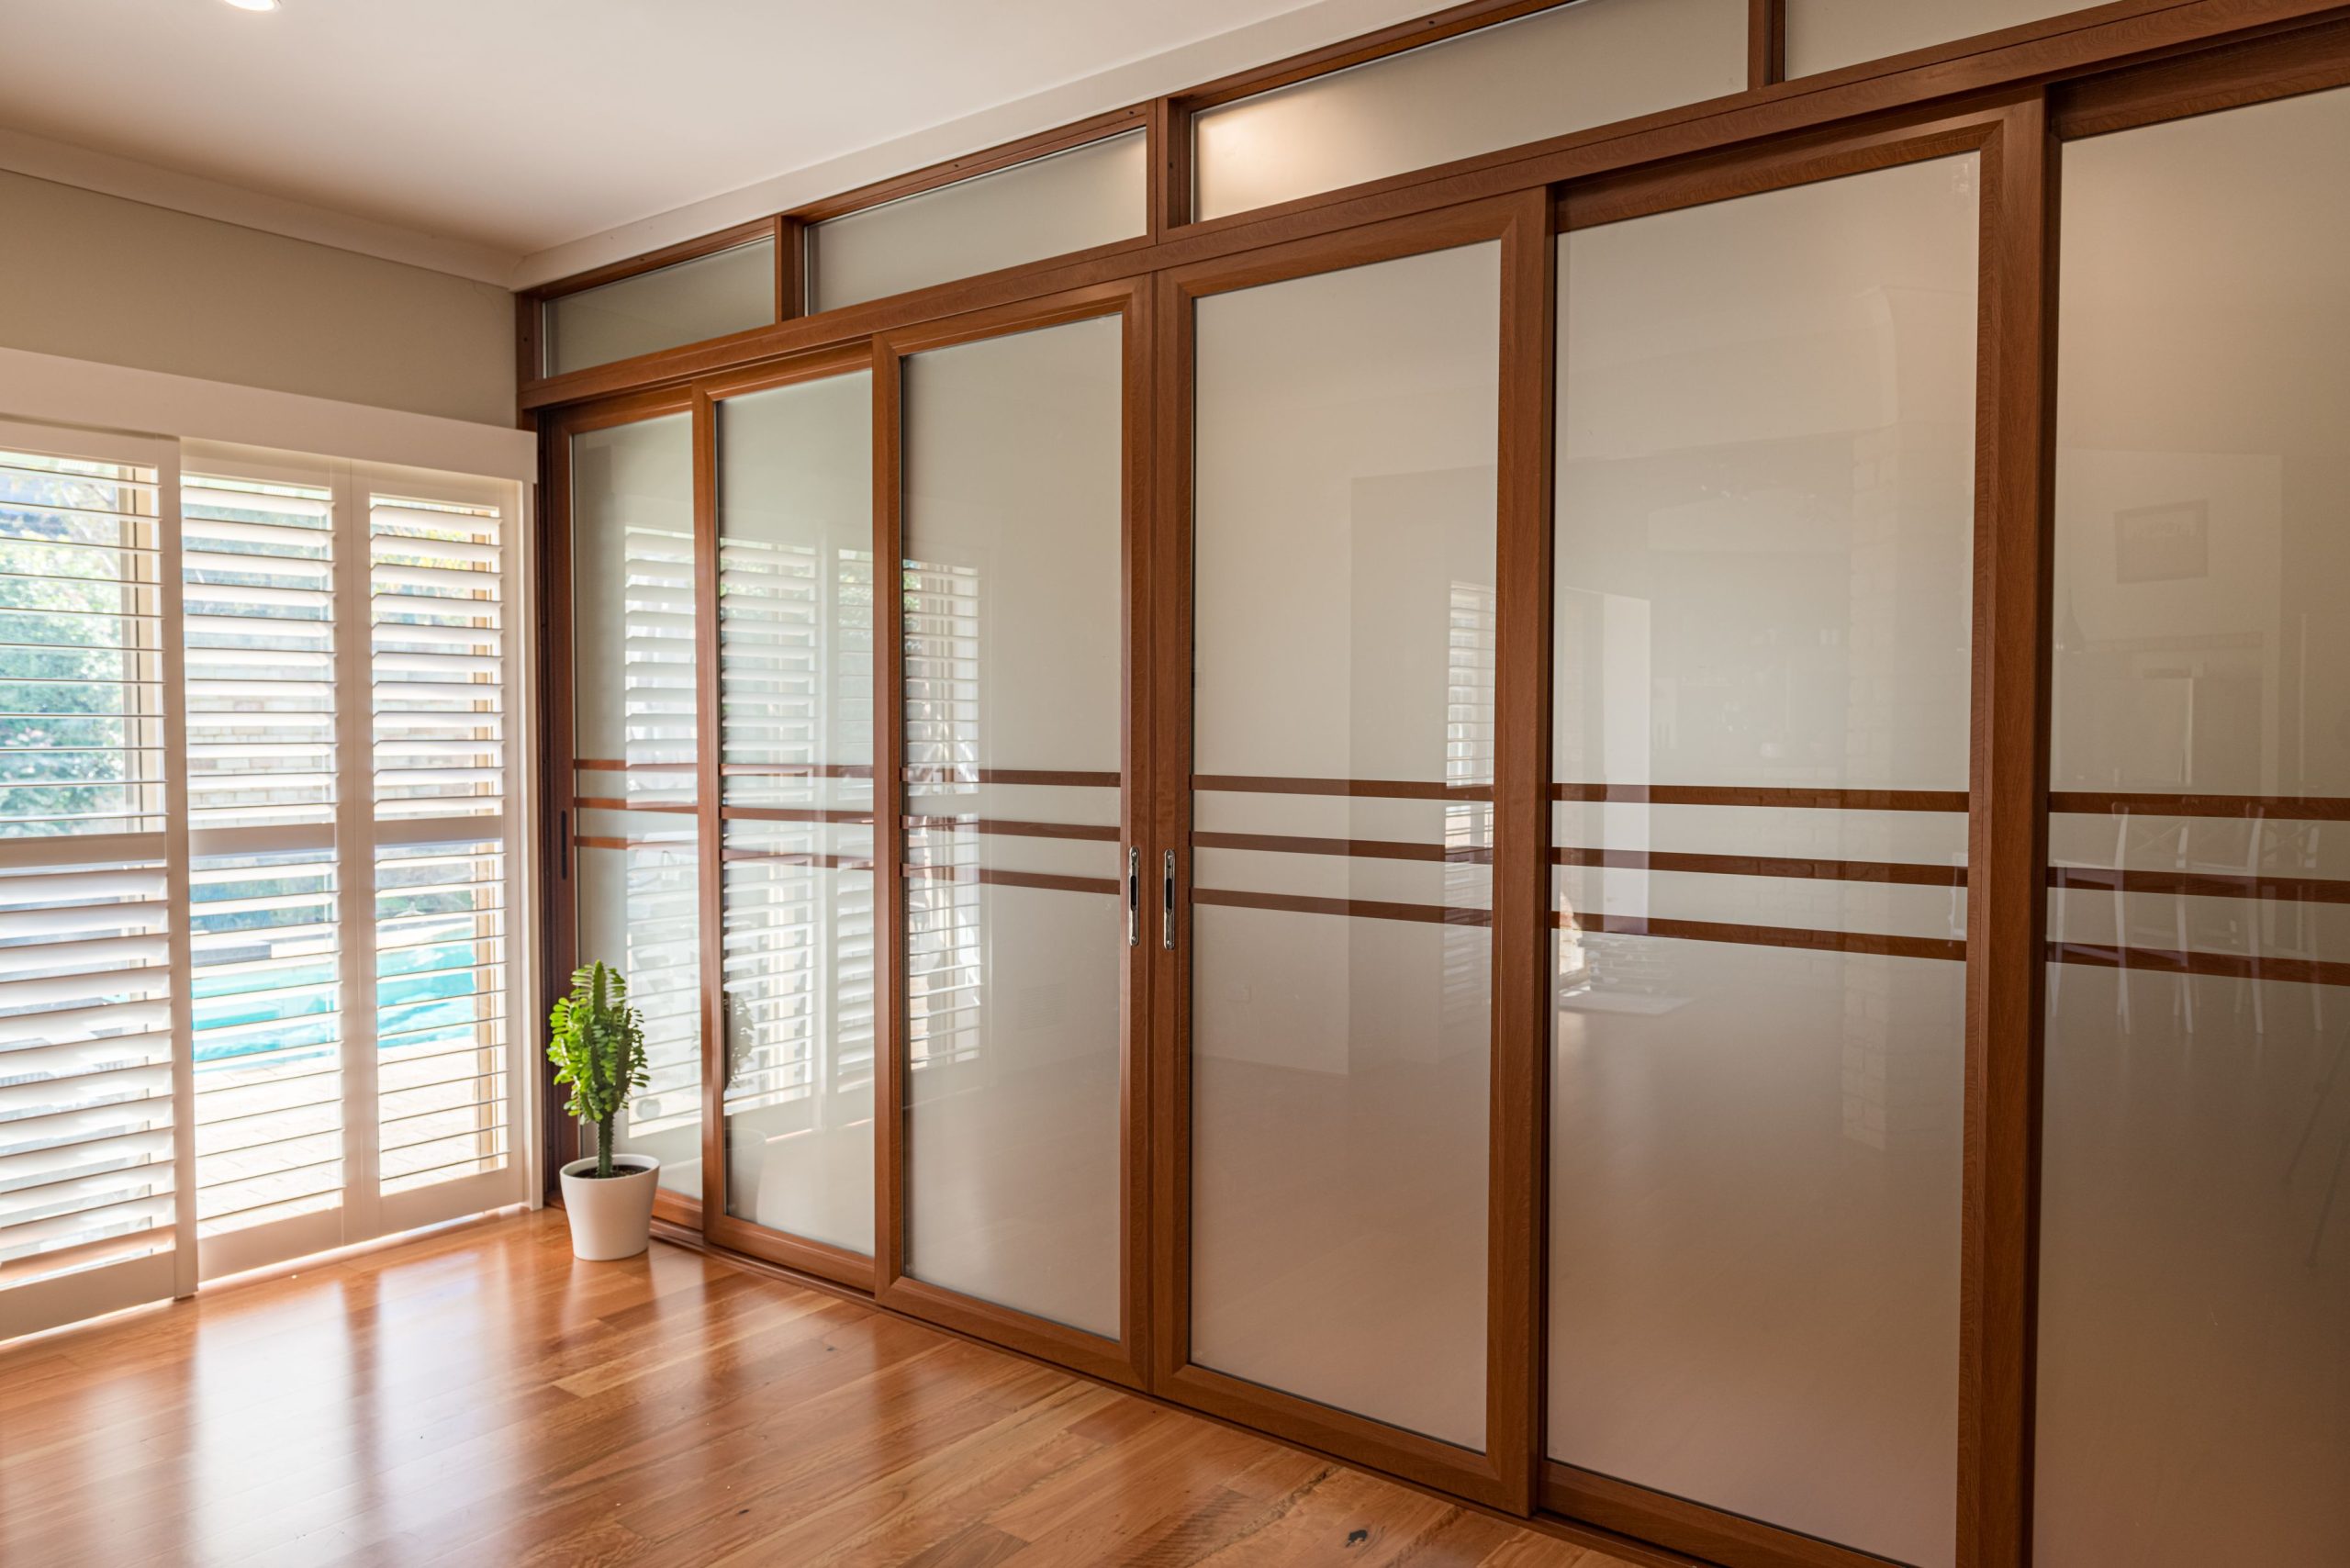 9 Types Of Internal Doors To Choose For Your Home - Doors Plus